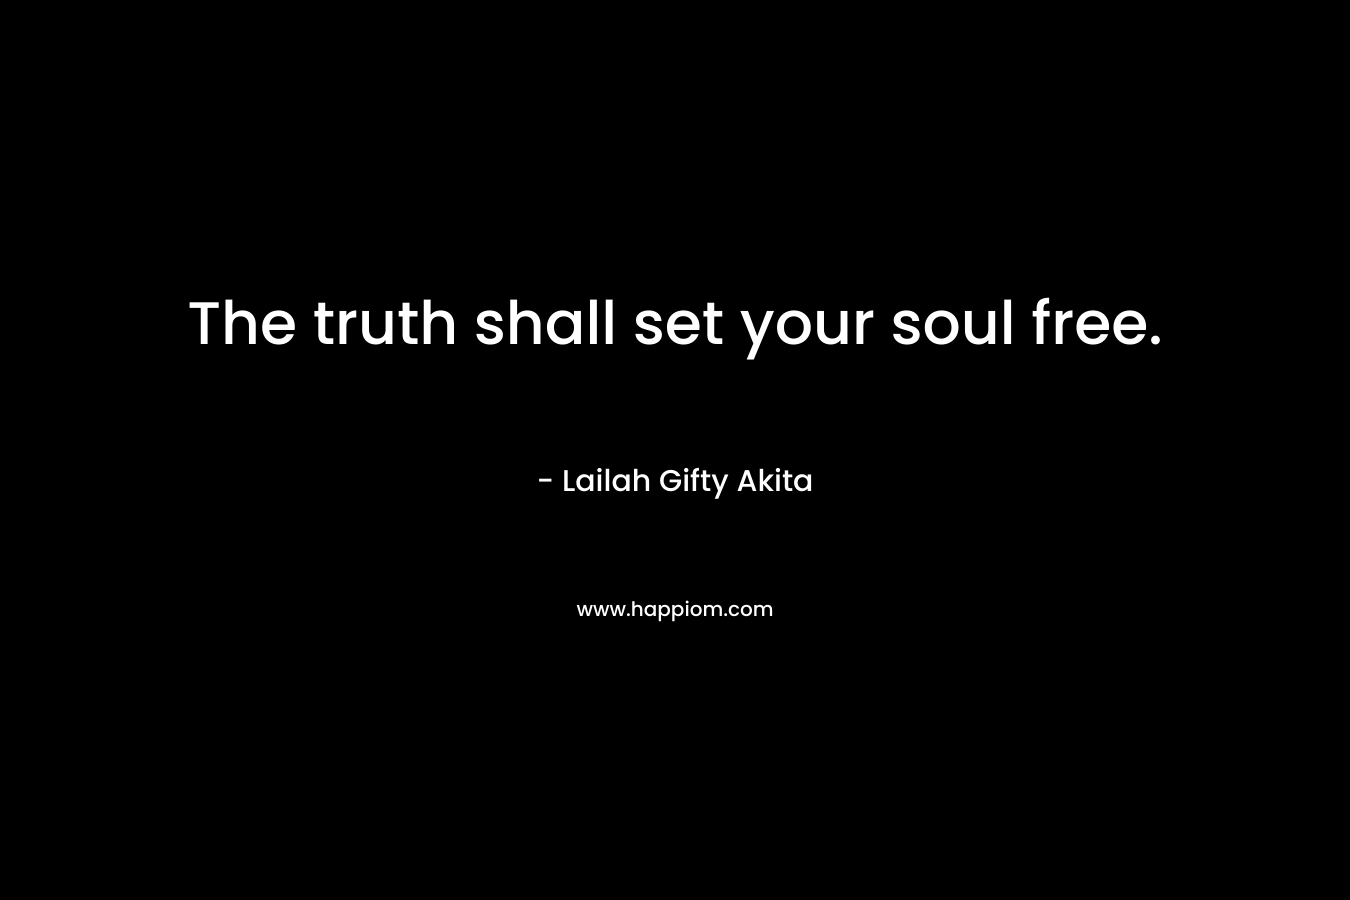 The truth shall set your soul free.